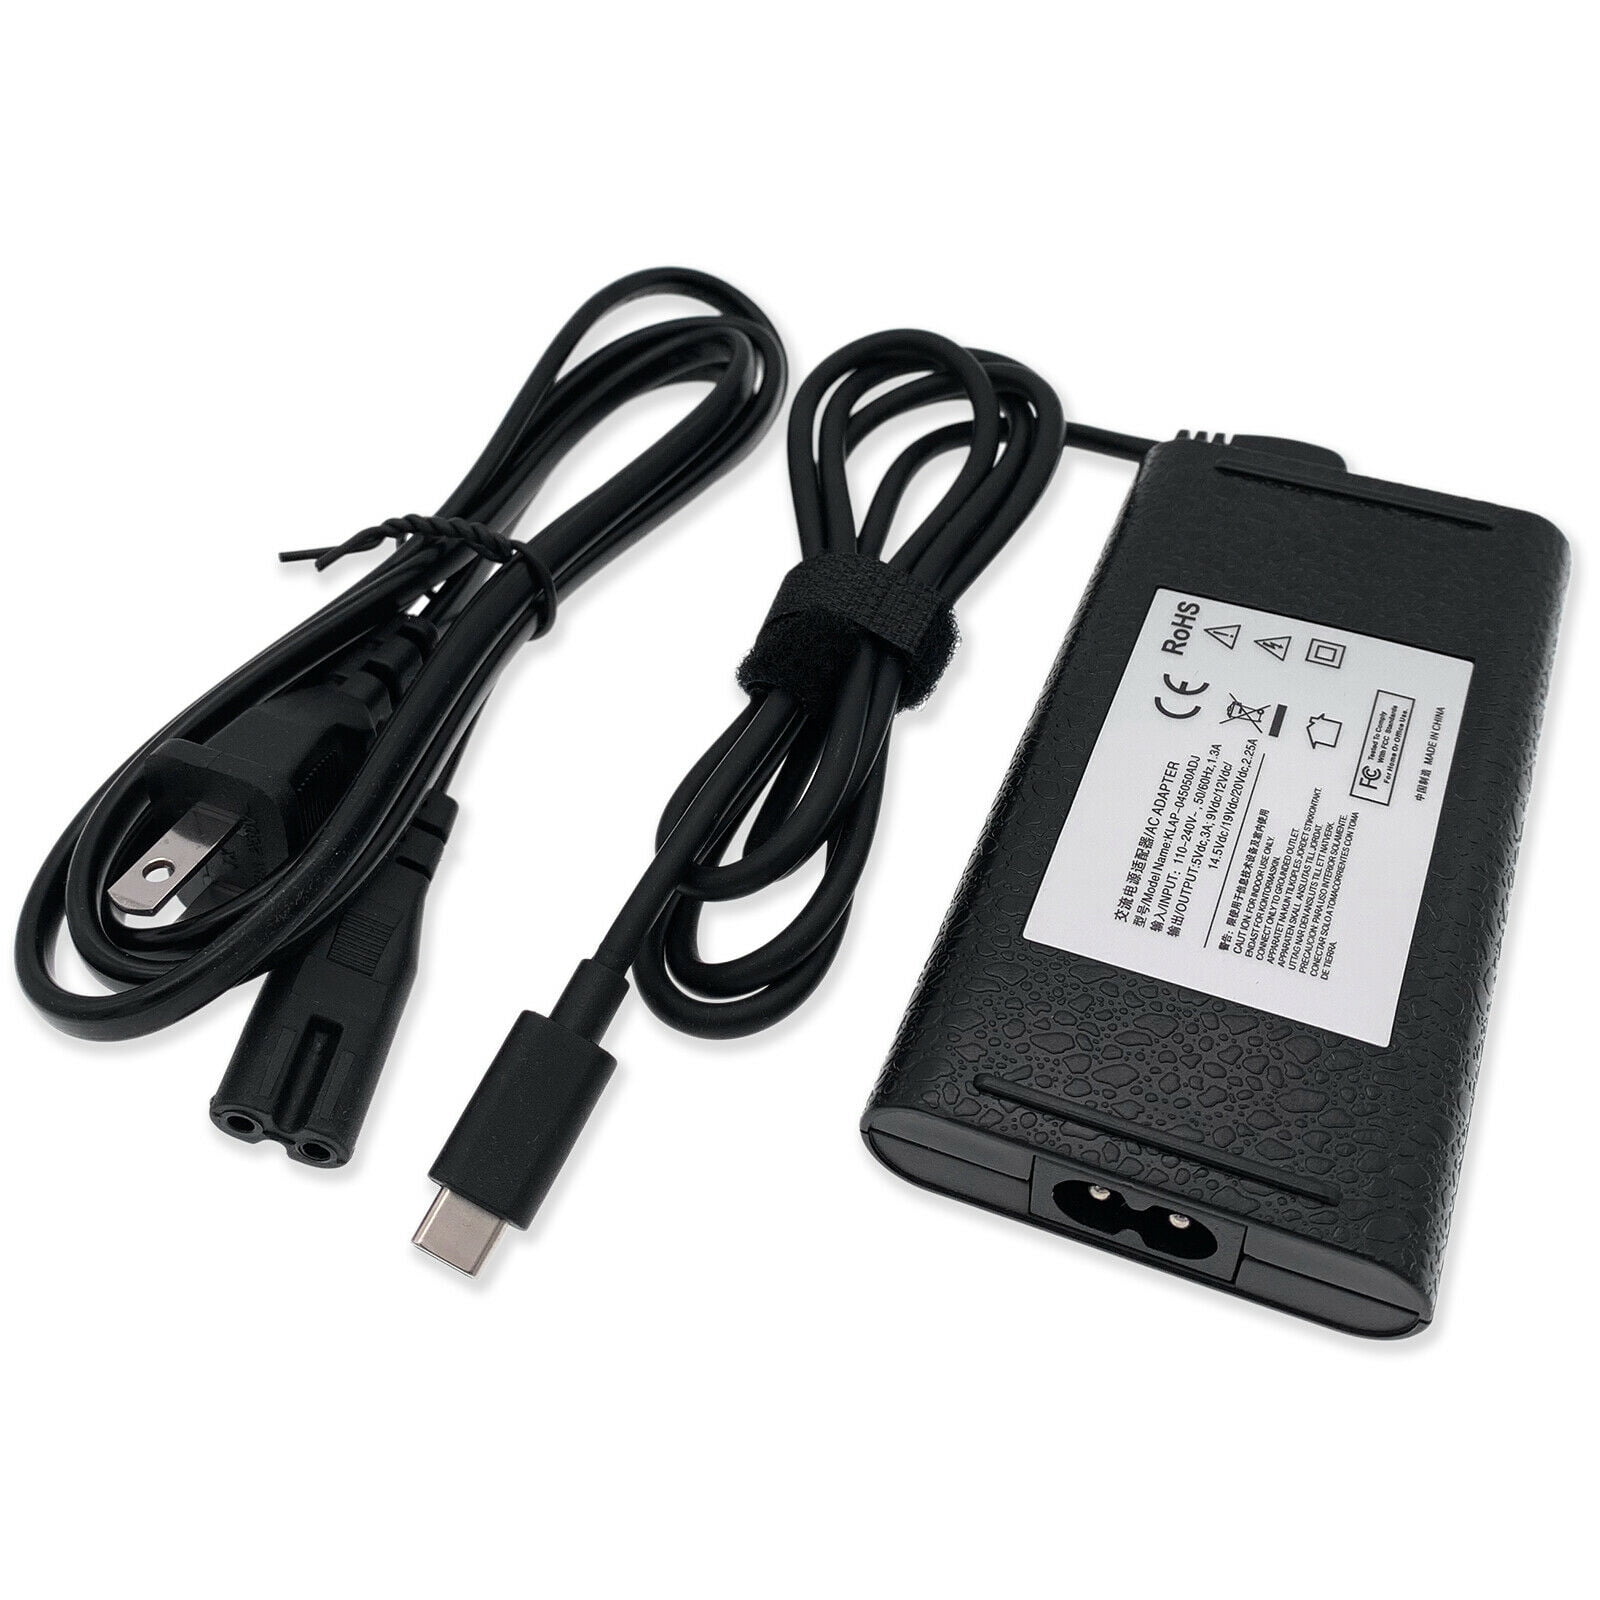 External Laptop Battery Charger for Packard Bell EasyNote LS11 TE11 TS11  AS10D81